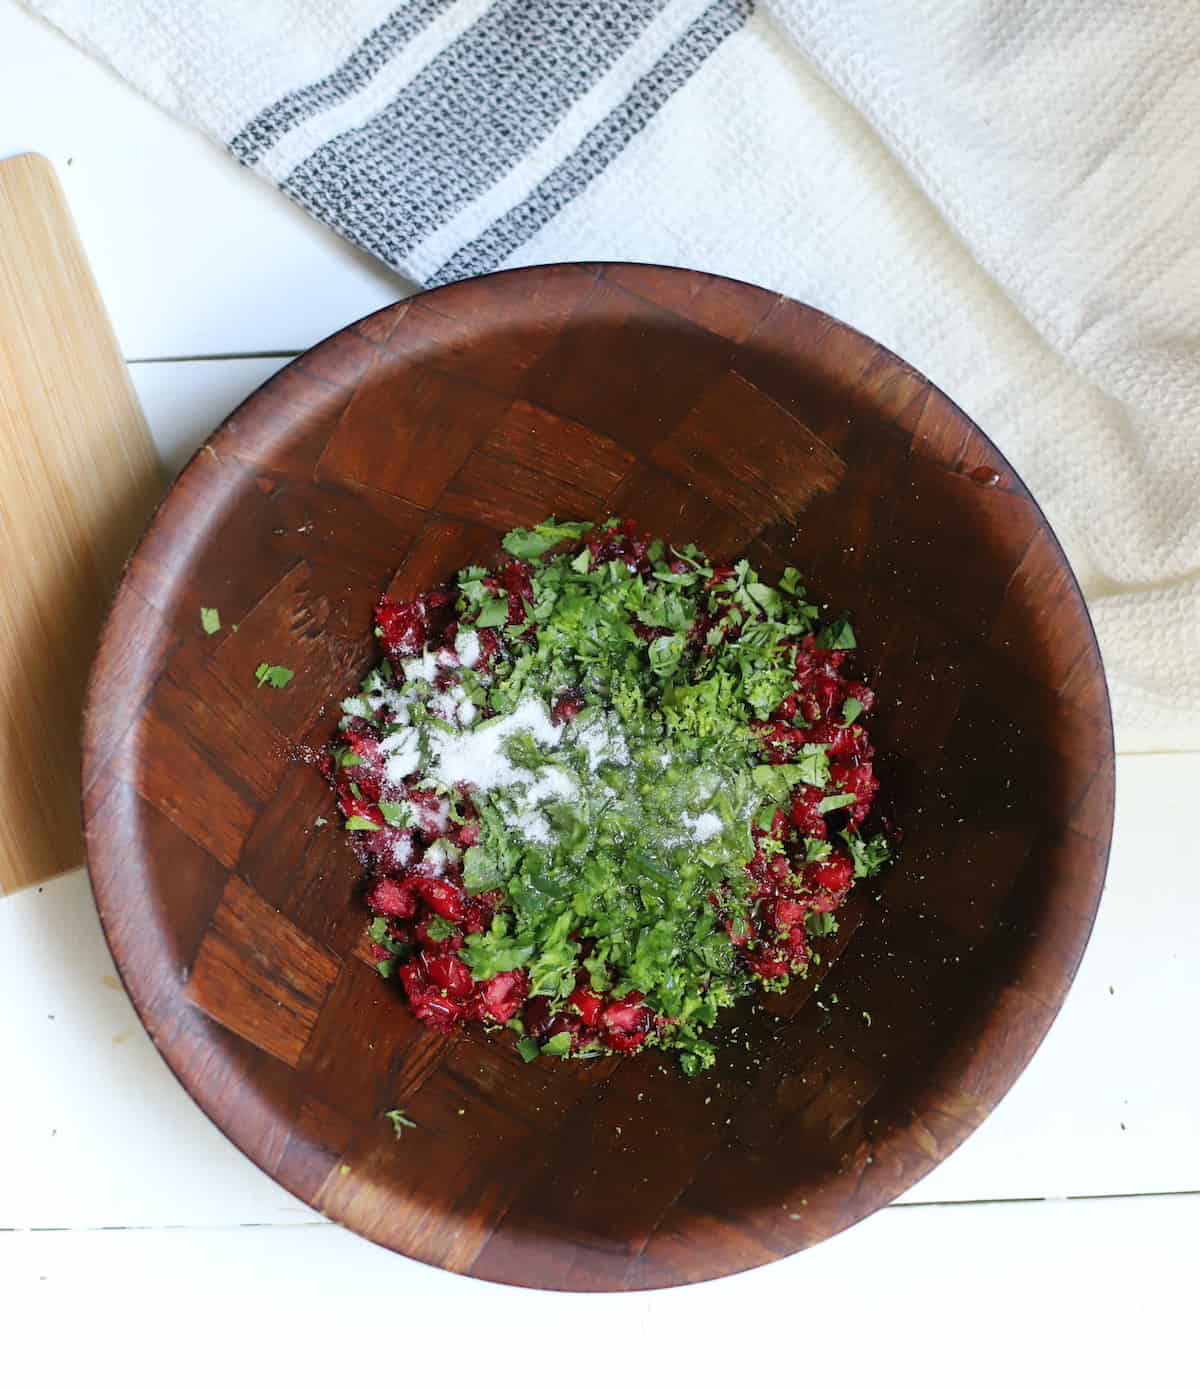 Cranberry salsa ingredients in a wood bowl.